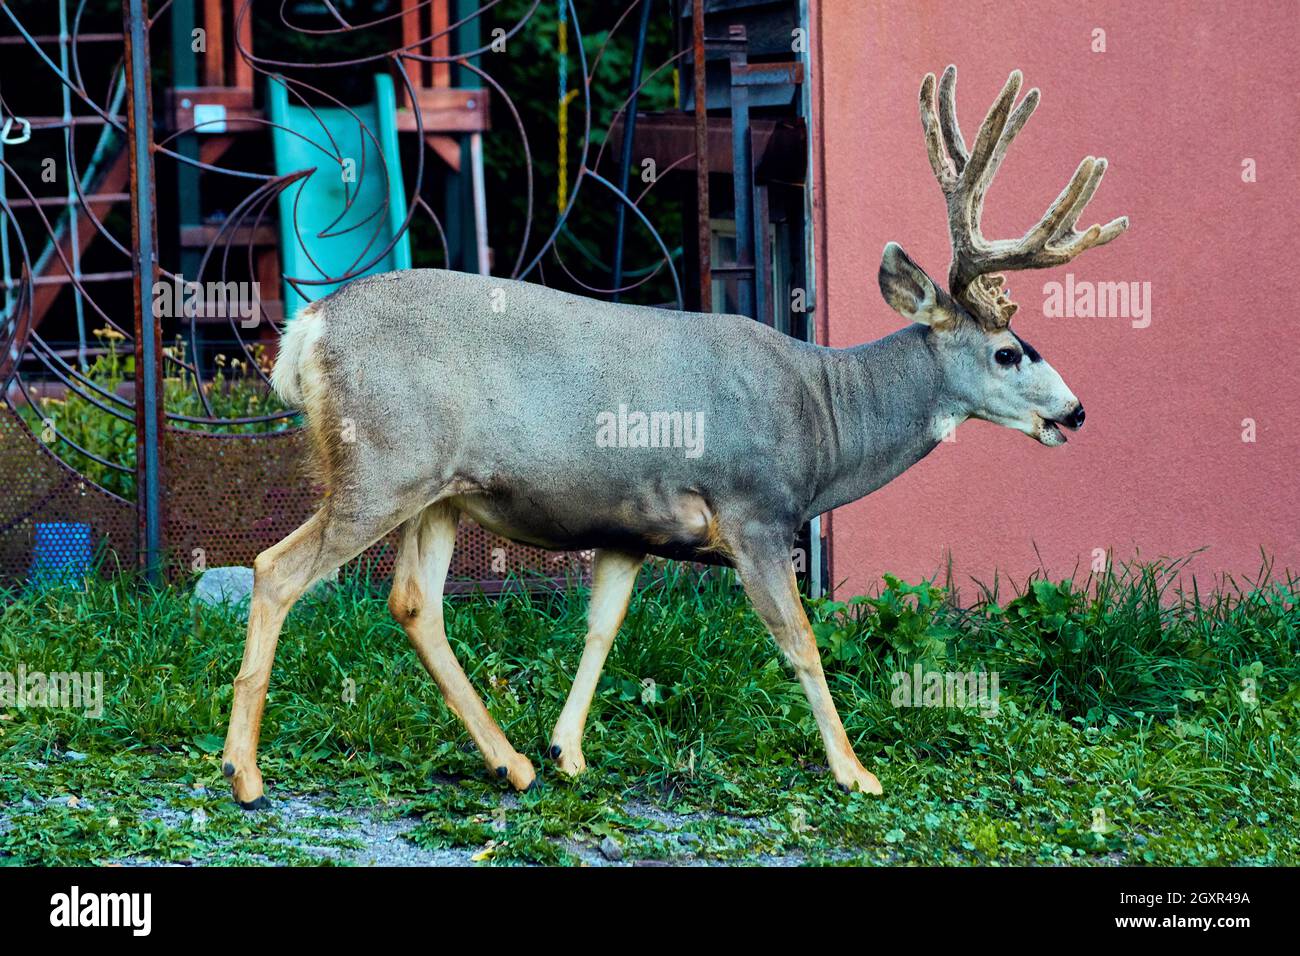 Side profile of large deer with antlers in suburban landscape Stock Photo